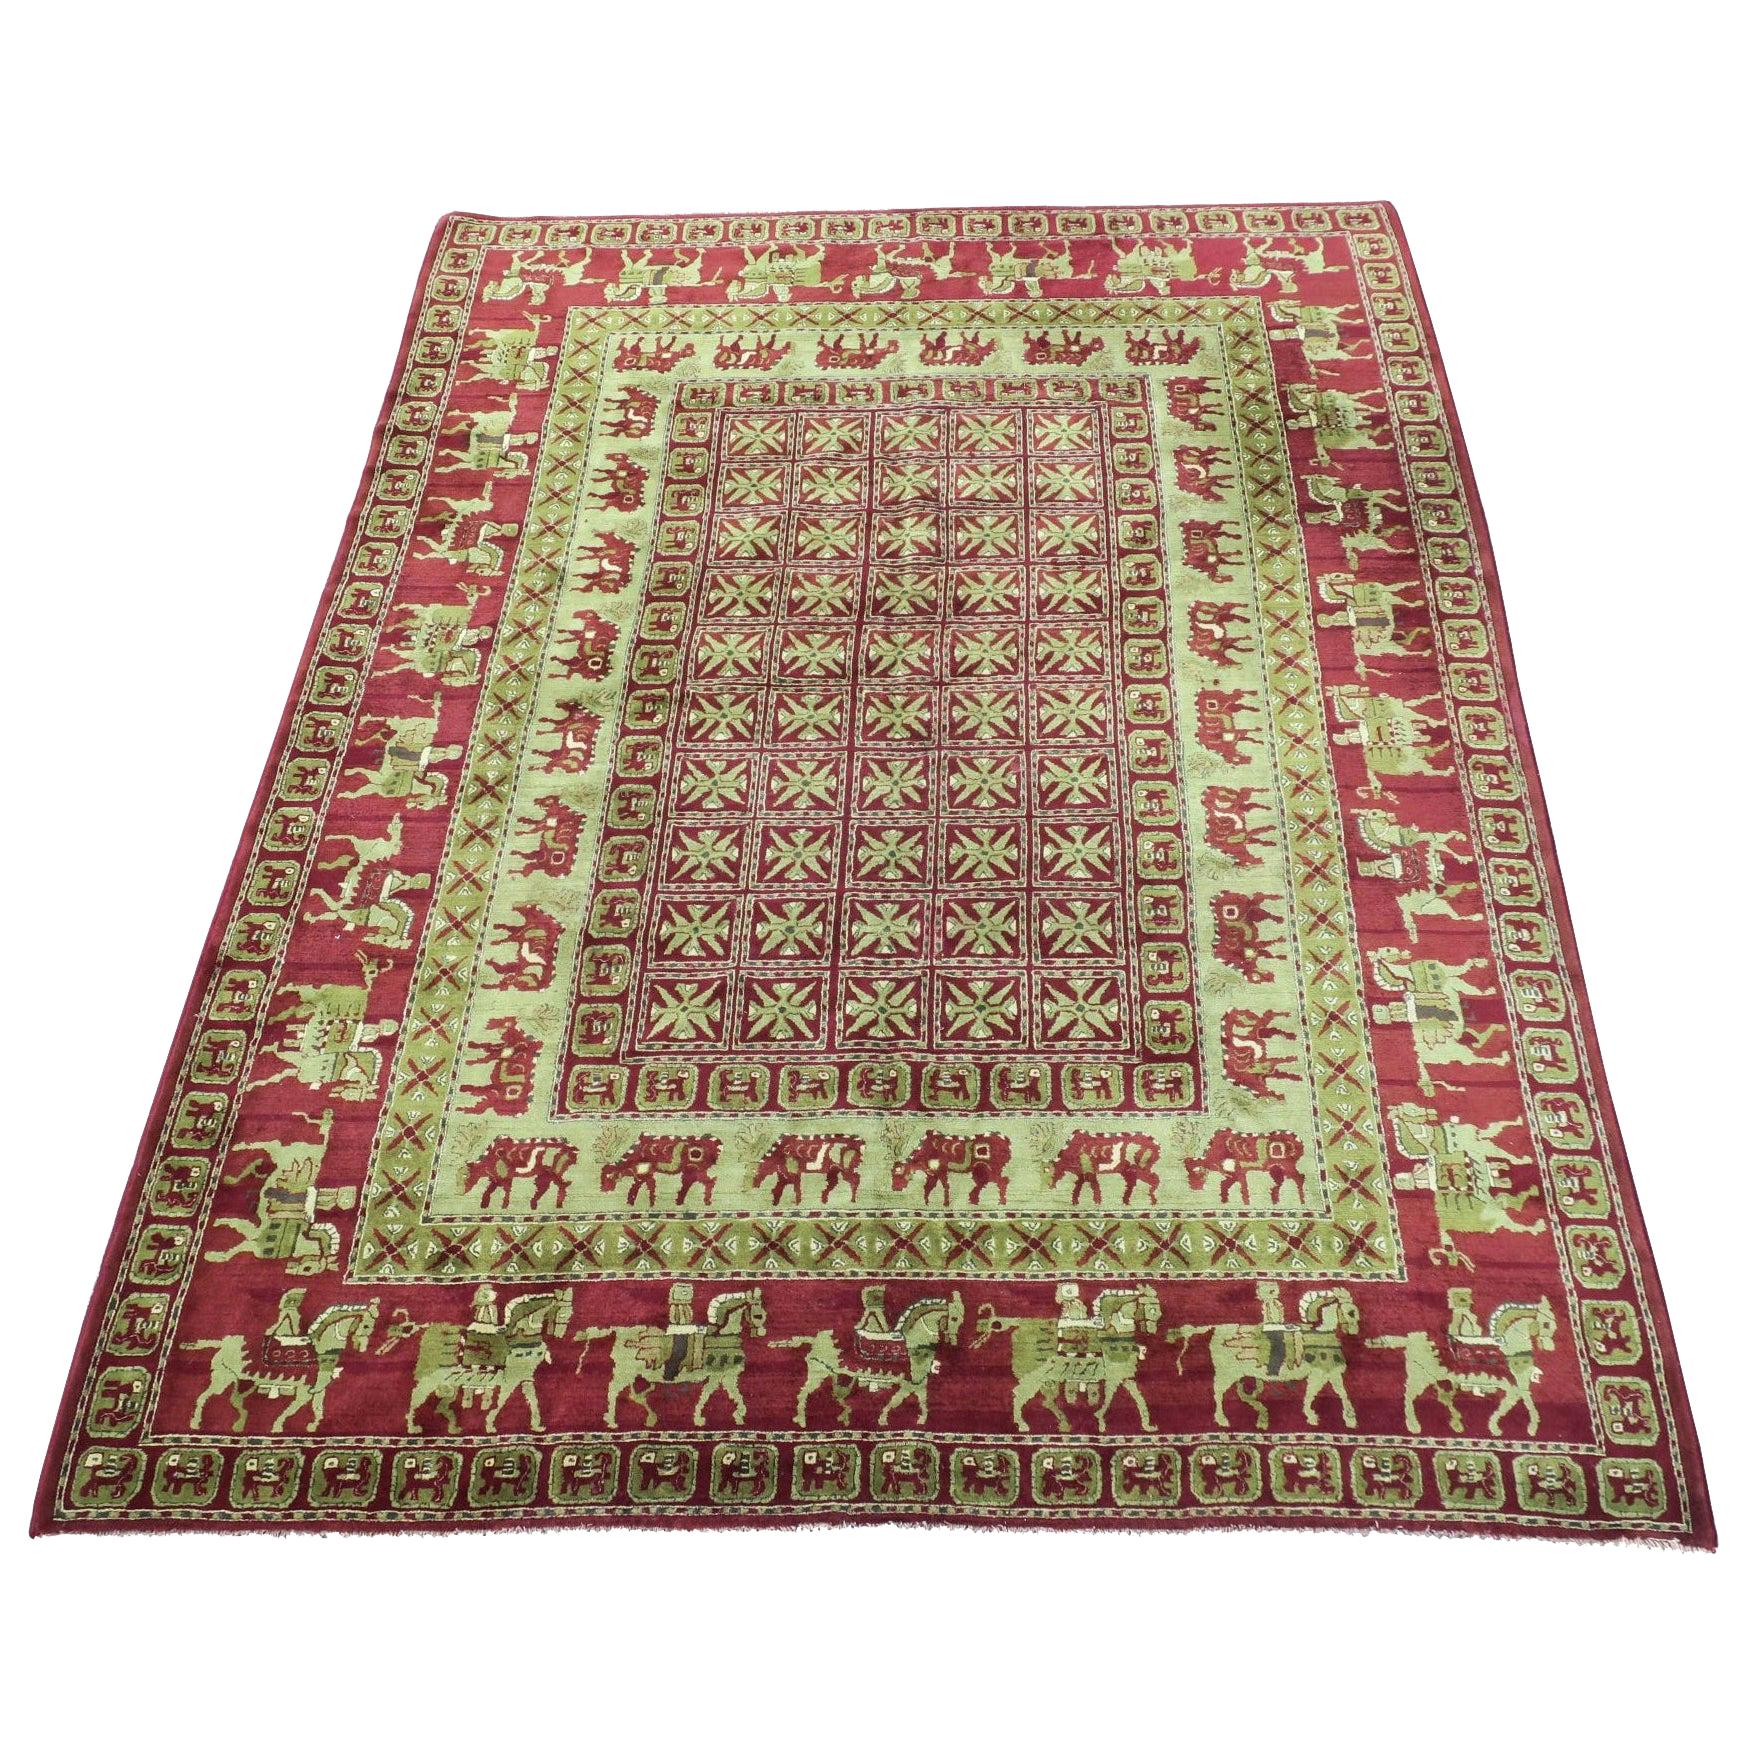 European Hooked Rug, Copy of Pazyryk the Oldest Carpet in the World For Sale